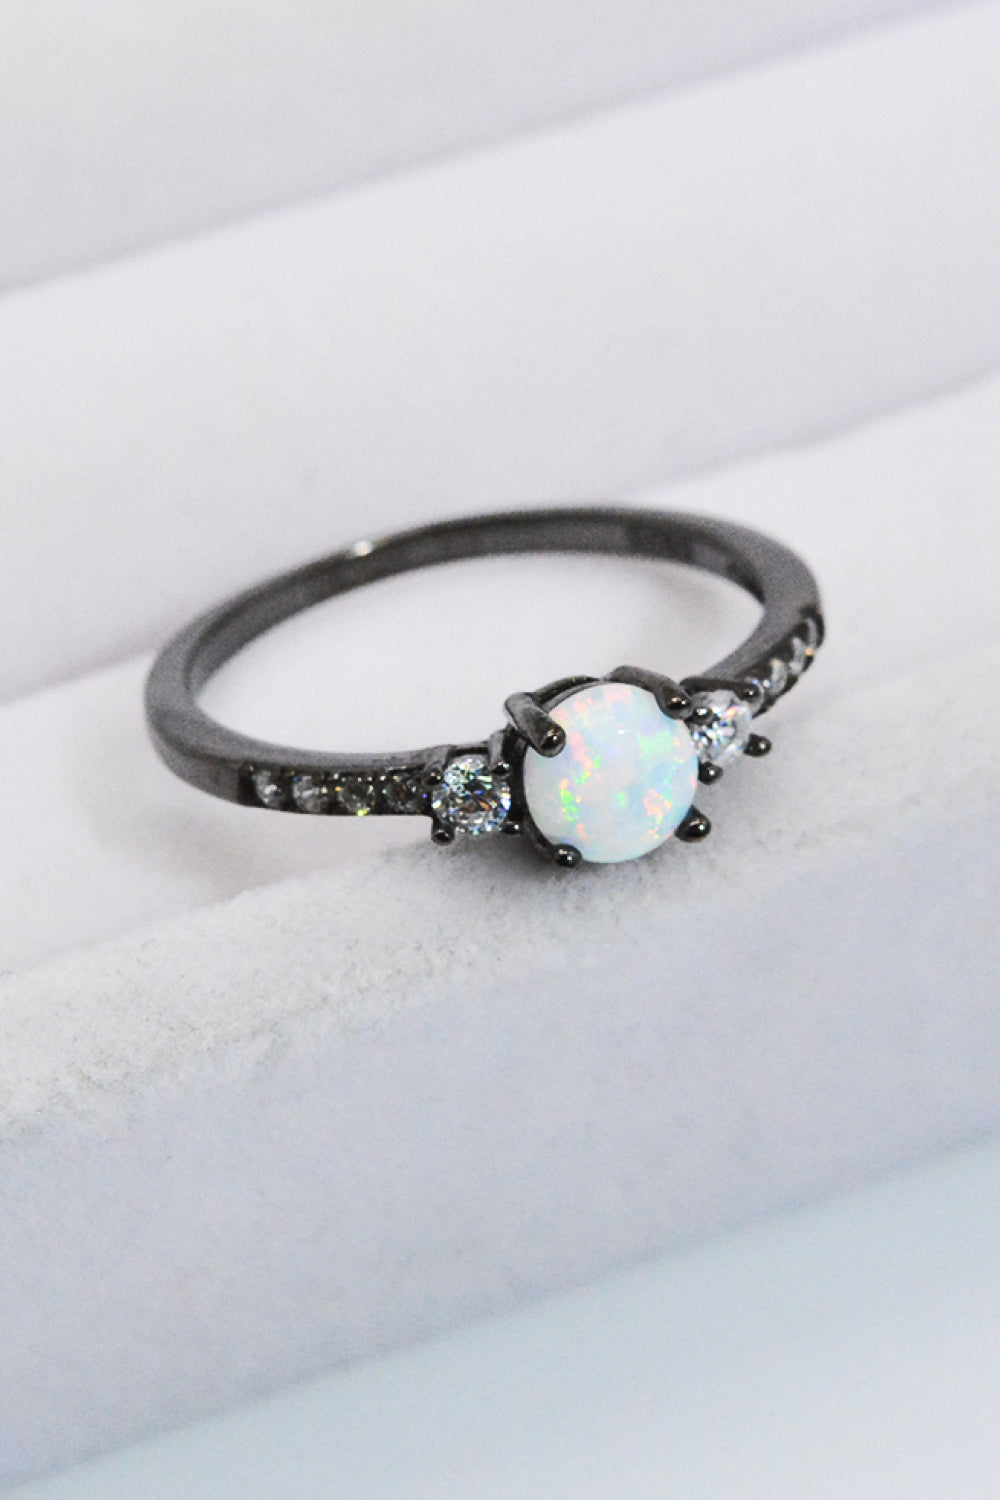 925 Sterling Silver Round Opal Ring - Tophatter Shopping Deals - Electronics, Jewelry, Auction, App, Bidding, Gadgets, Fashion